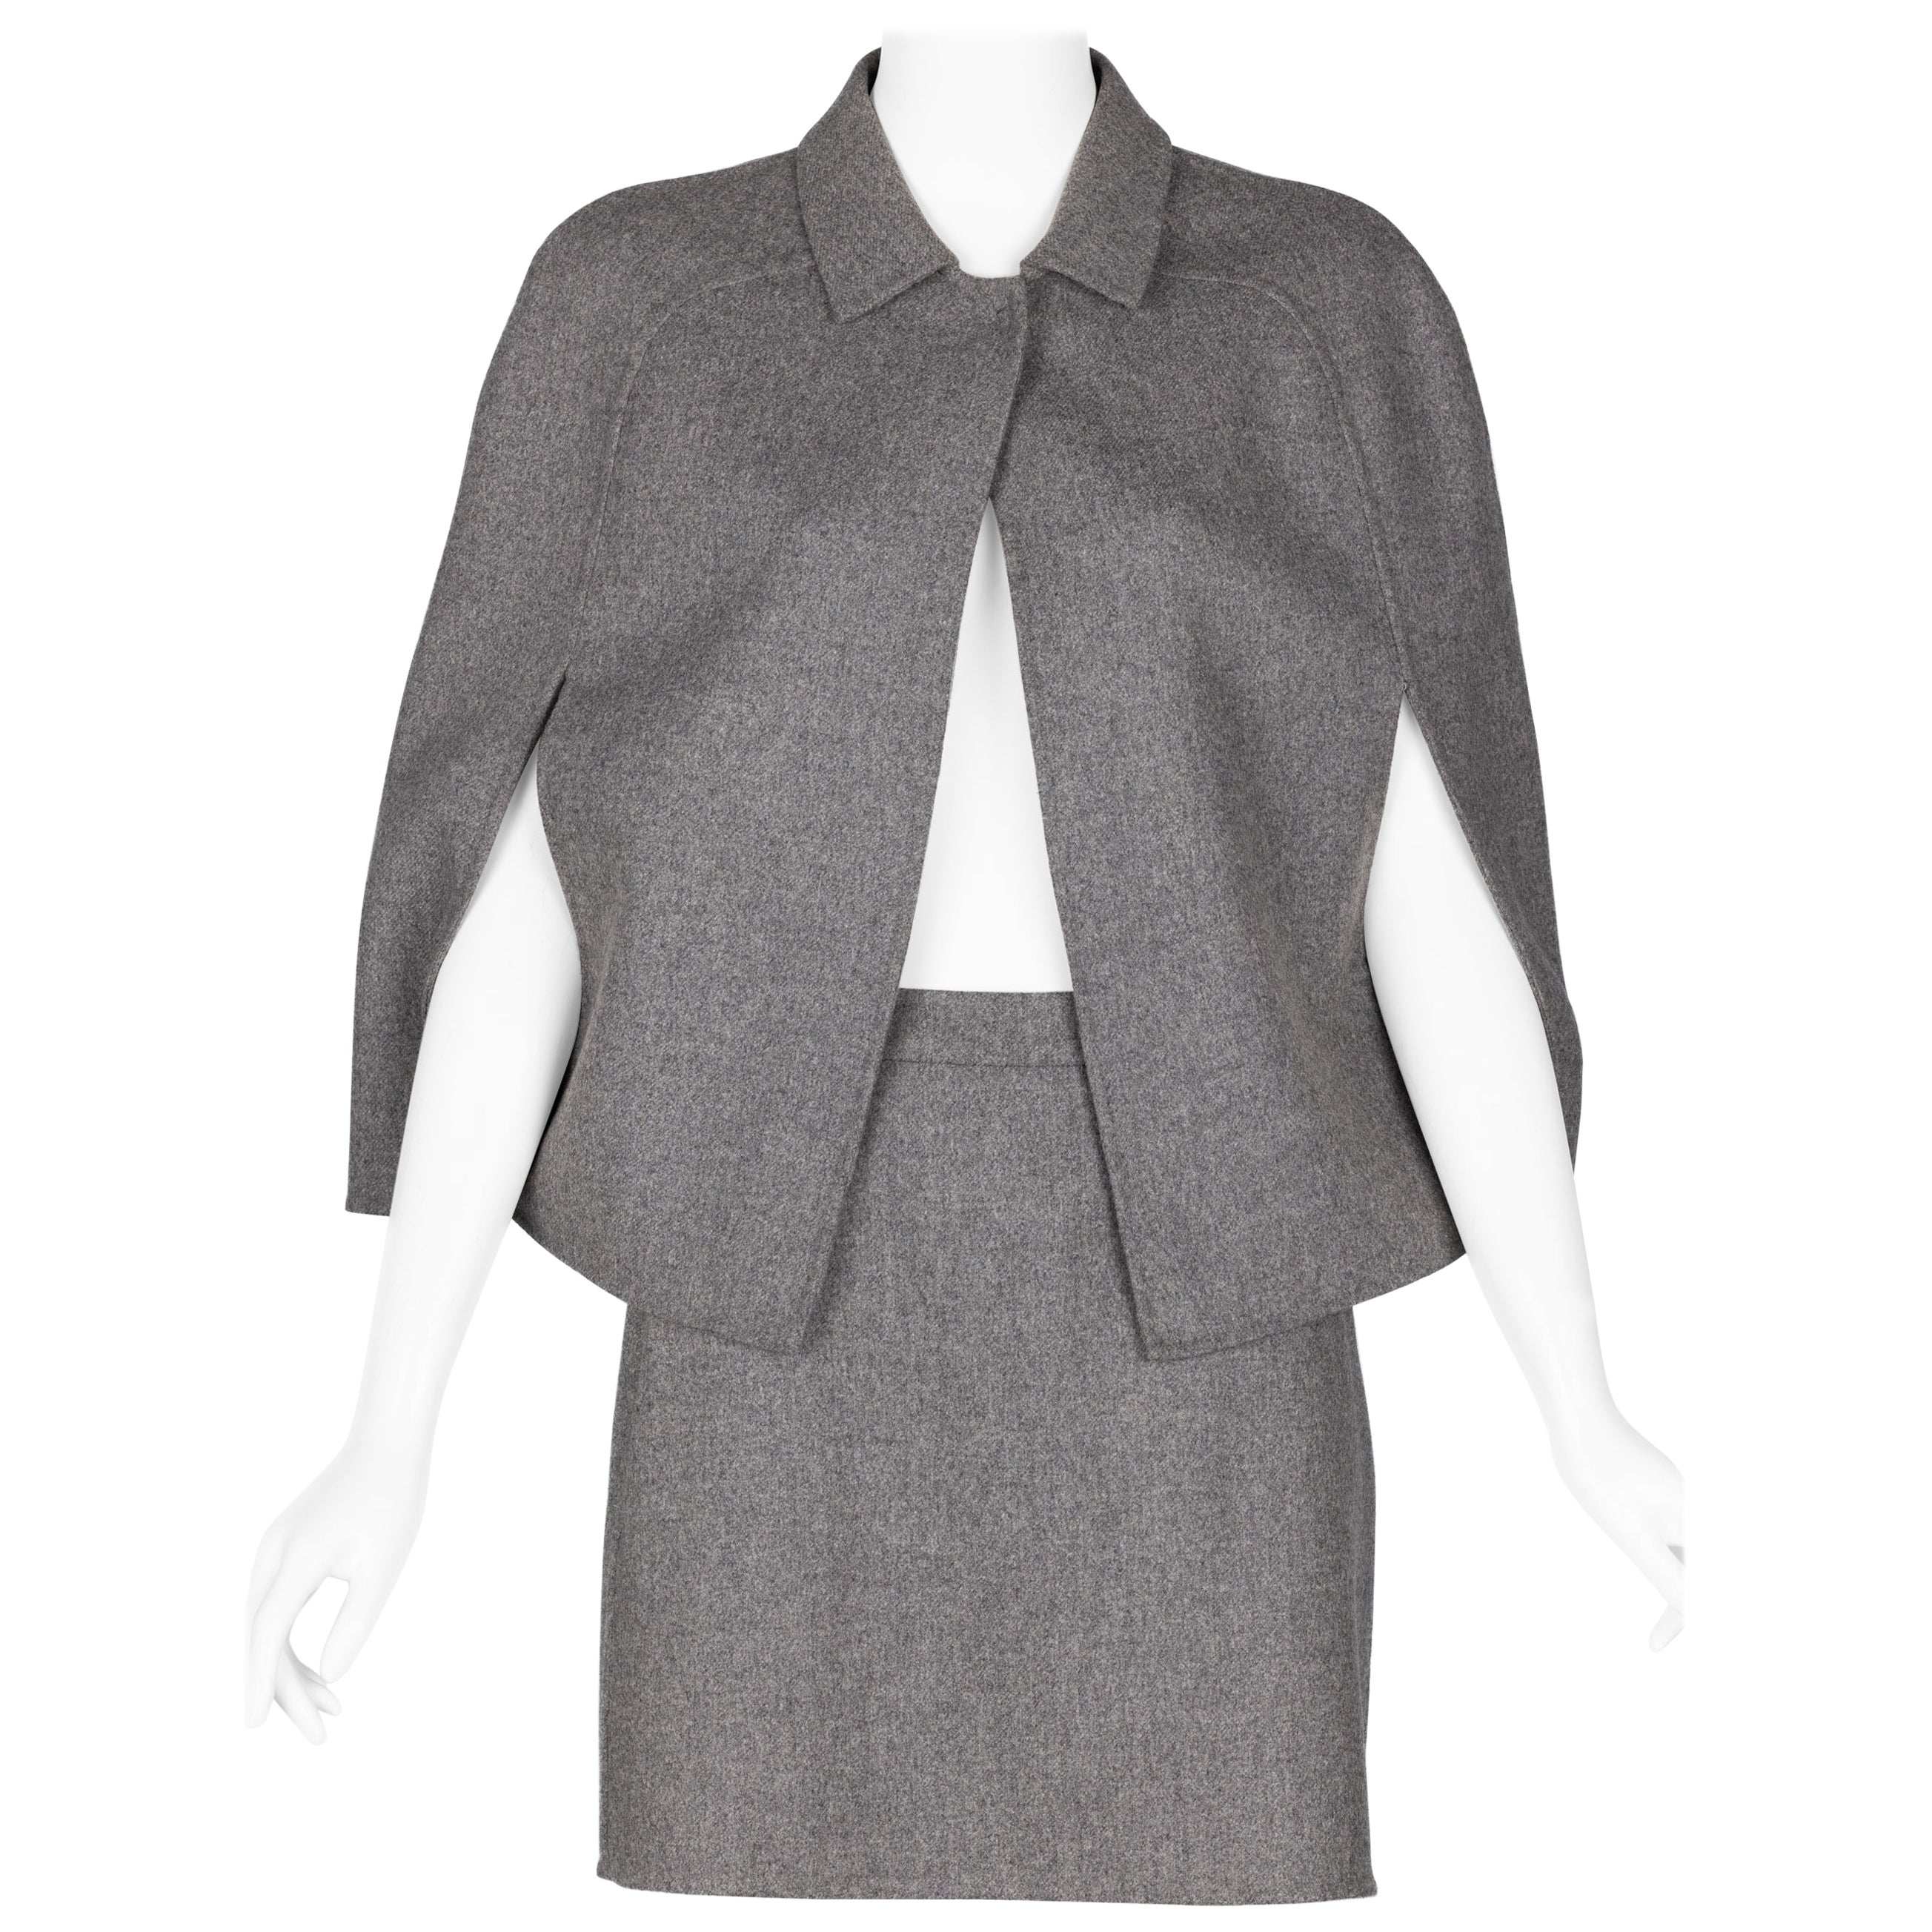 Done in a soft luxurious wool angora blend.
The cape has a concealed snap closure at the neck.
The skirt has side slash pockets and a concealed side zipper.
Unlined. Excellent pristine condition.
Professionally eco-dry cleaned and pressed.


Size: 4